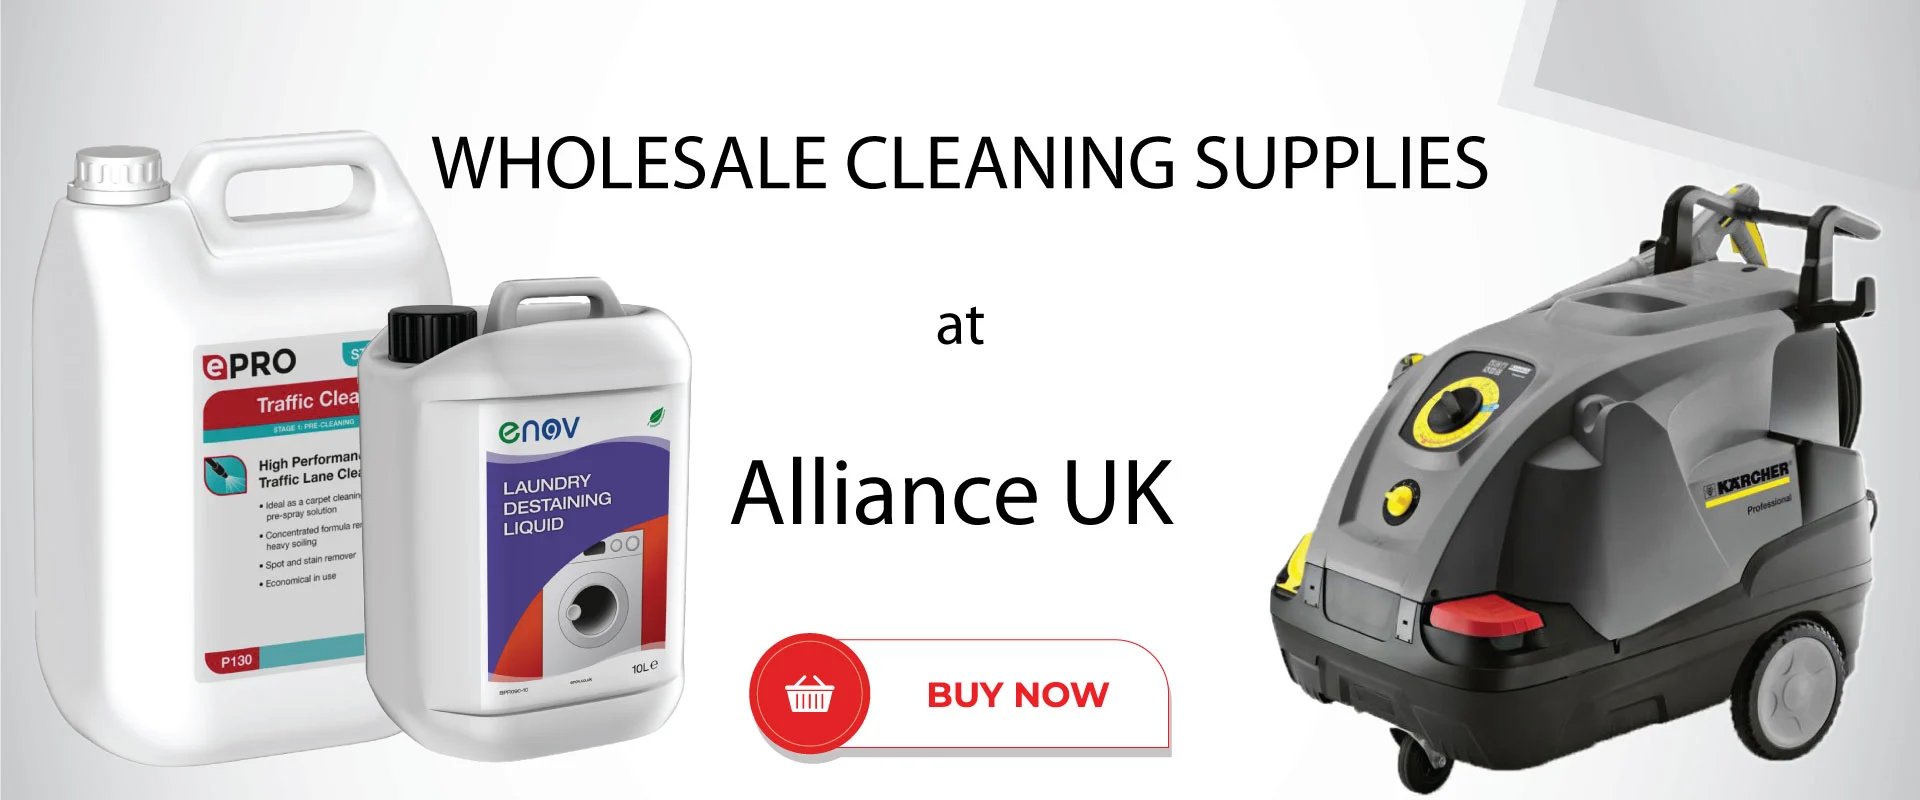 Wholesale Cleaning Supplies at Alliance UK